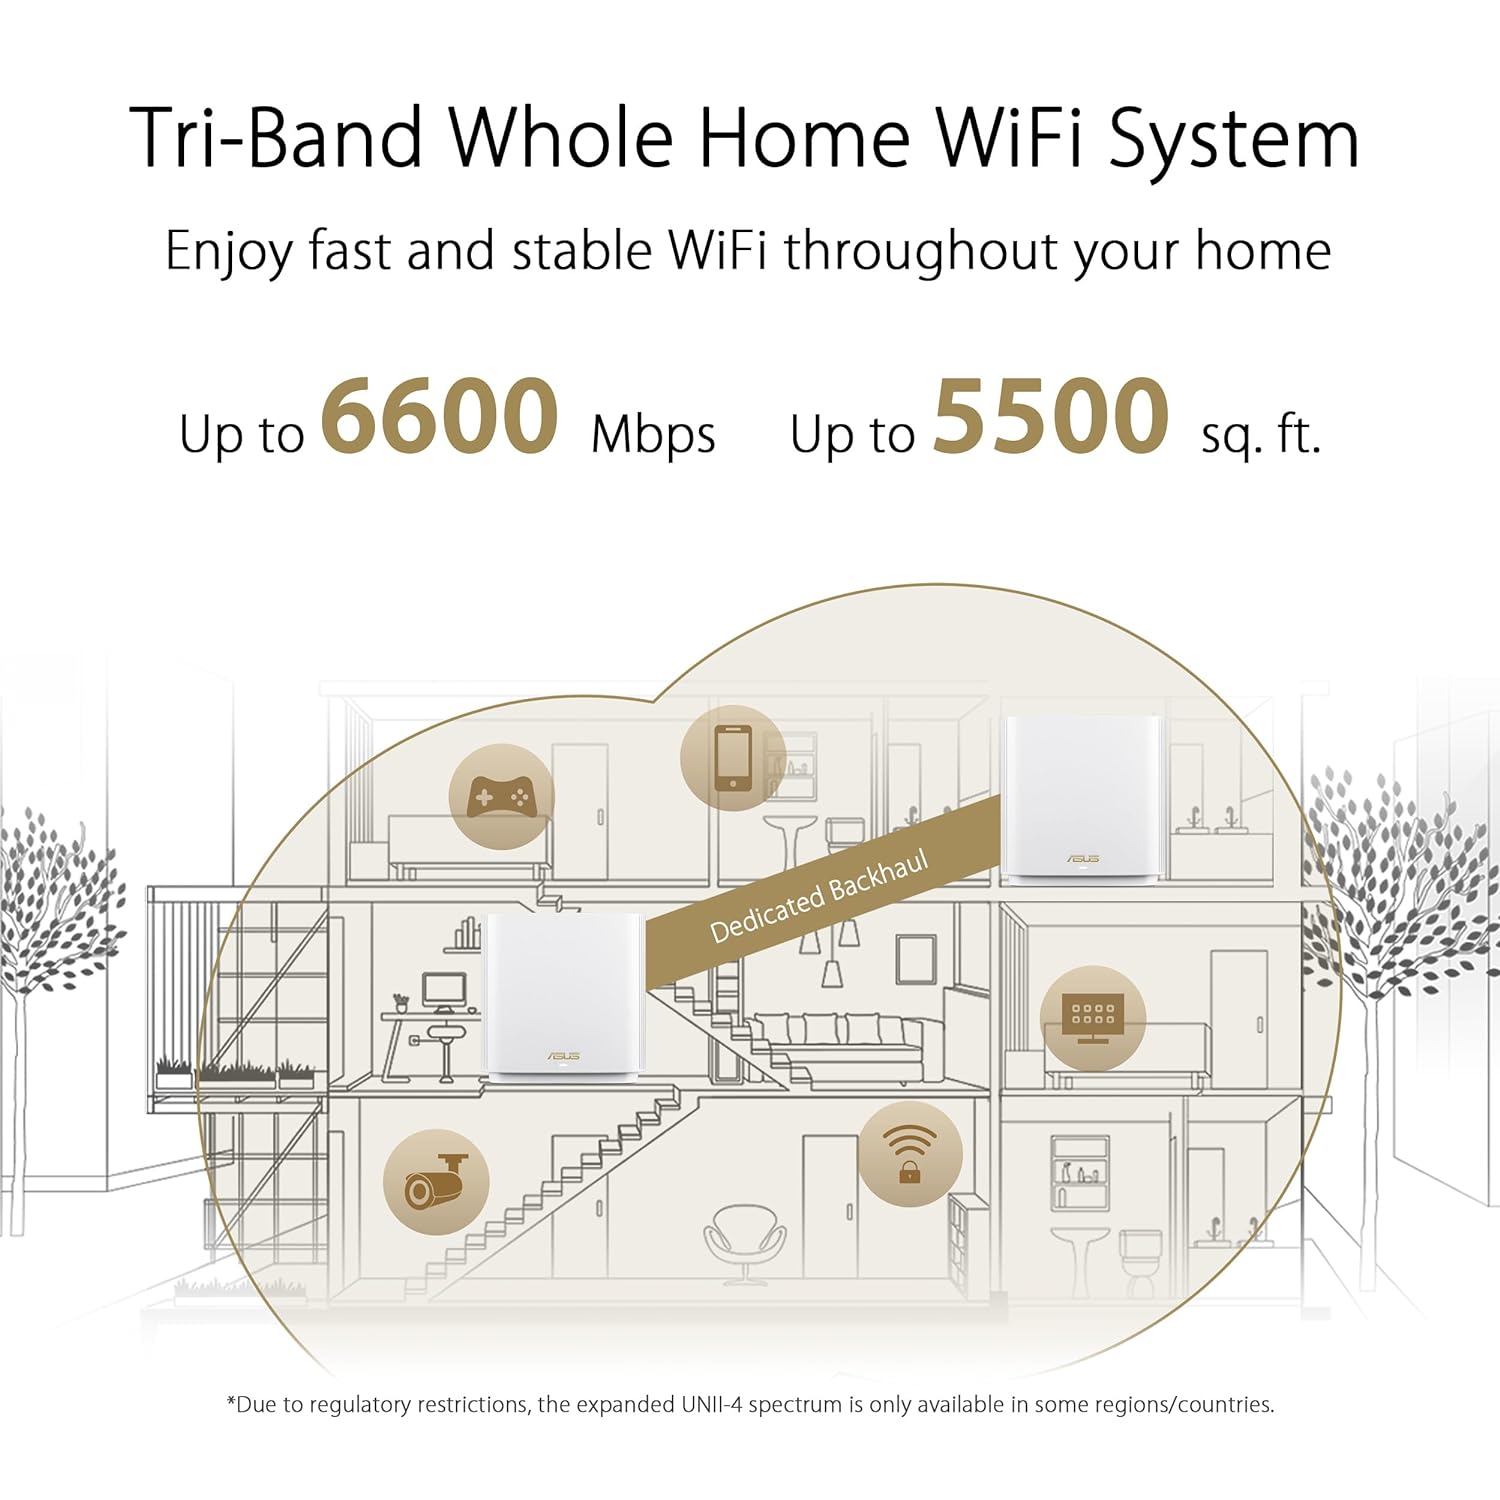 ASUS ZenWiFi AX6600 Tri-Band Mesh WiFi 6 System (XT8 1PK) - Whole Home Coverage up to 2750 sq.ft & 4+ rooms, AiMesh, Included Lifetime Internet Security, Easy Setup, 3 SSID, Parental Control, White